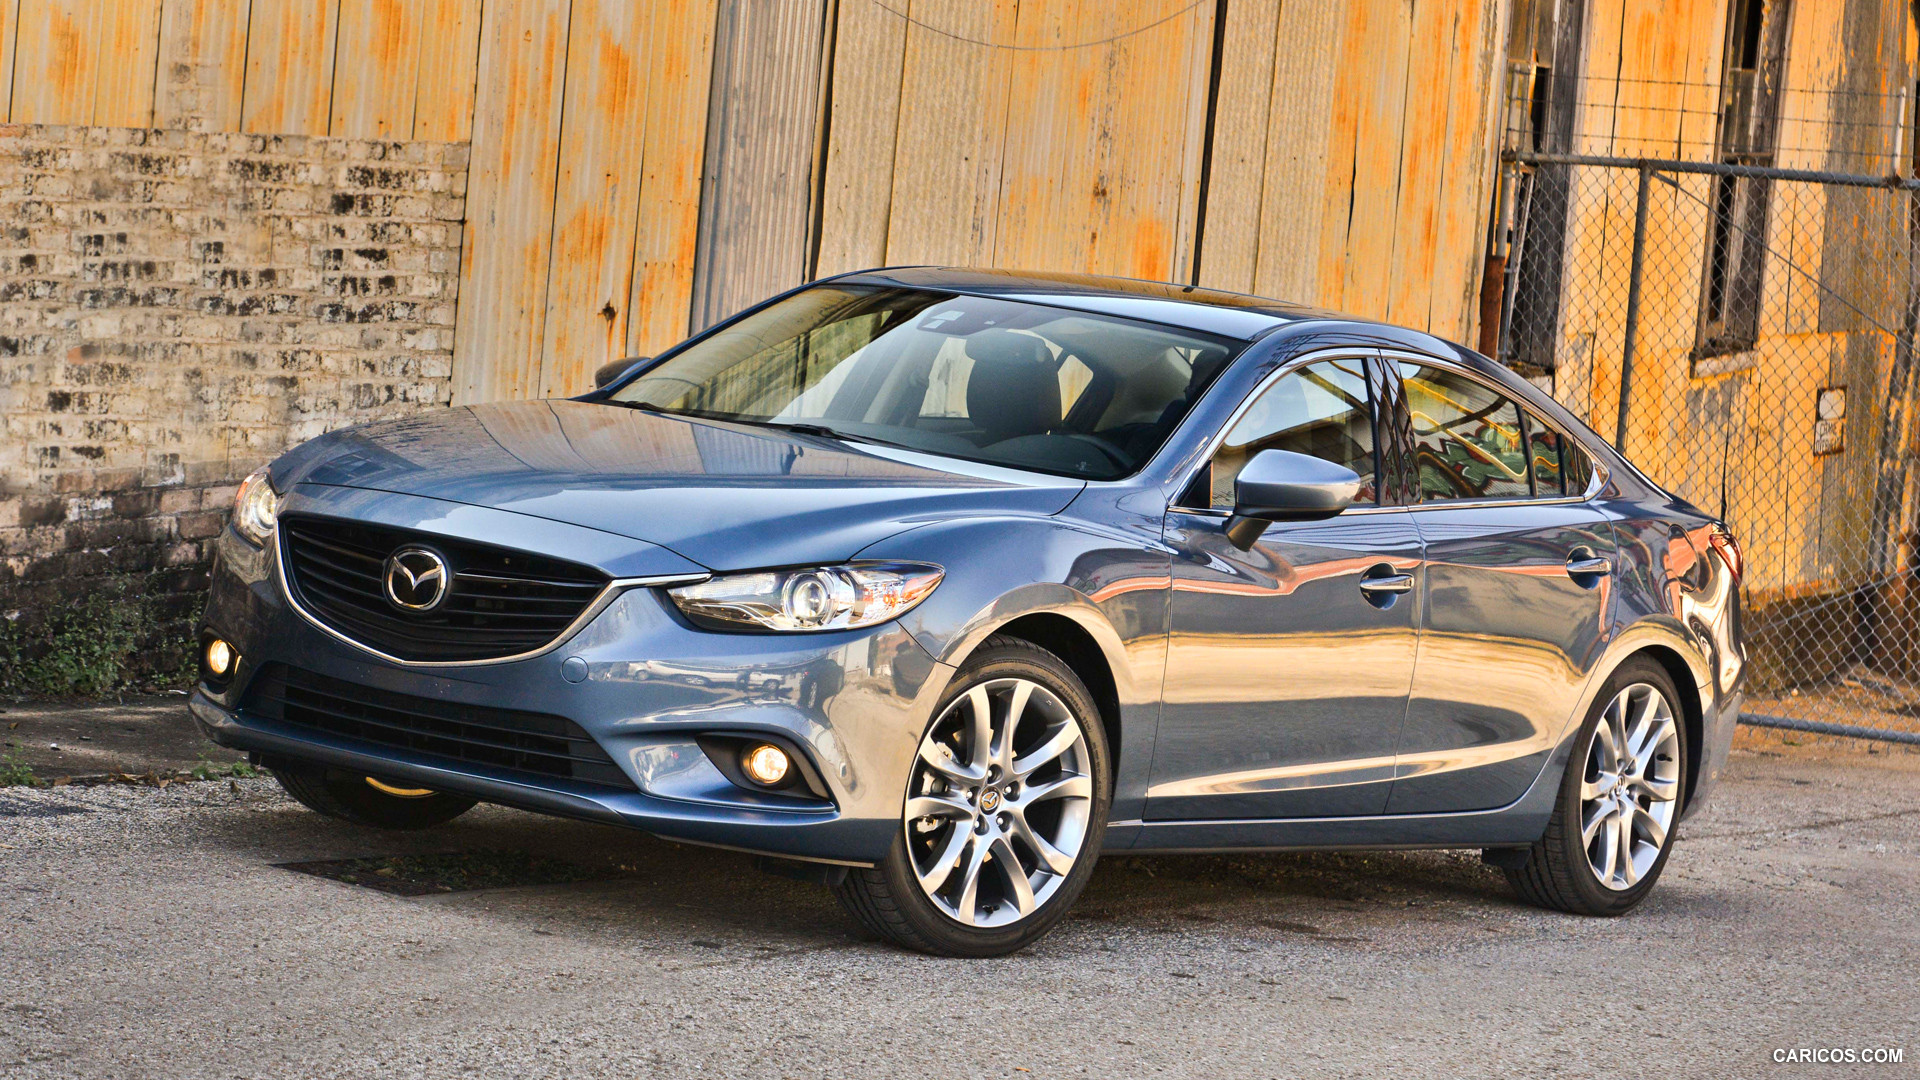 2014 Mazda6 GT - Front, #110 of 179